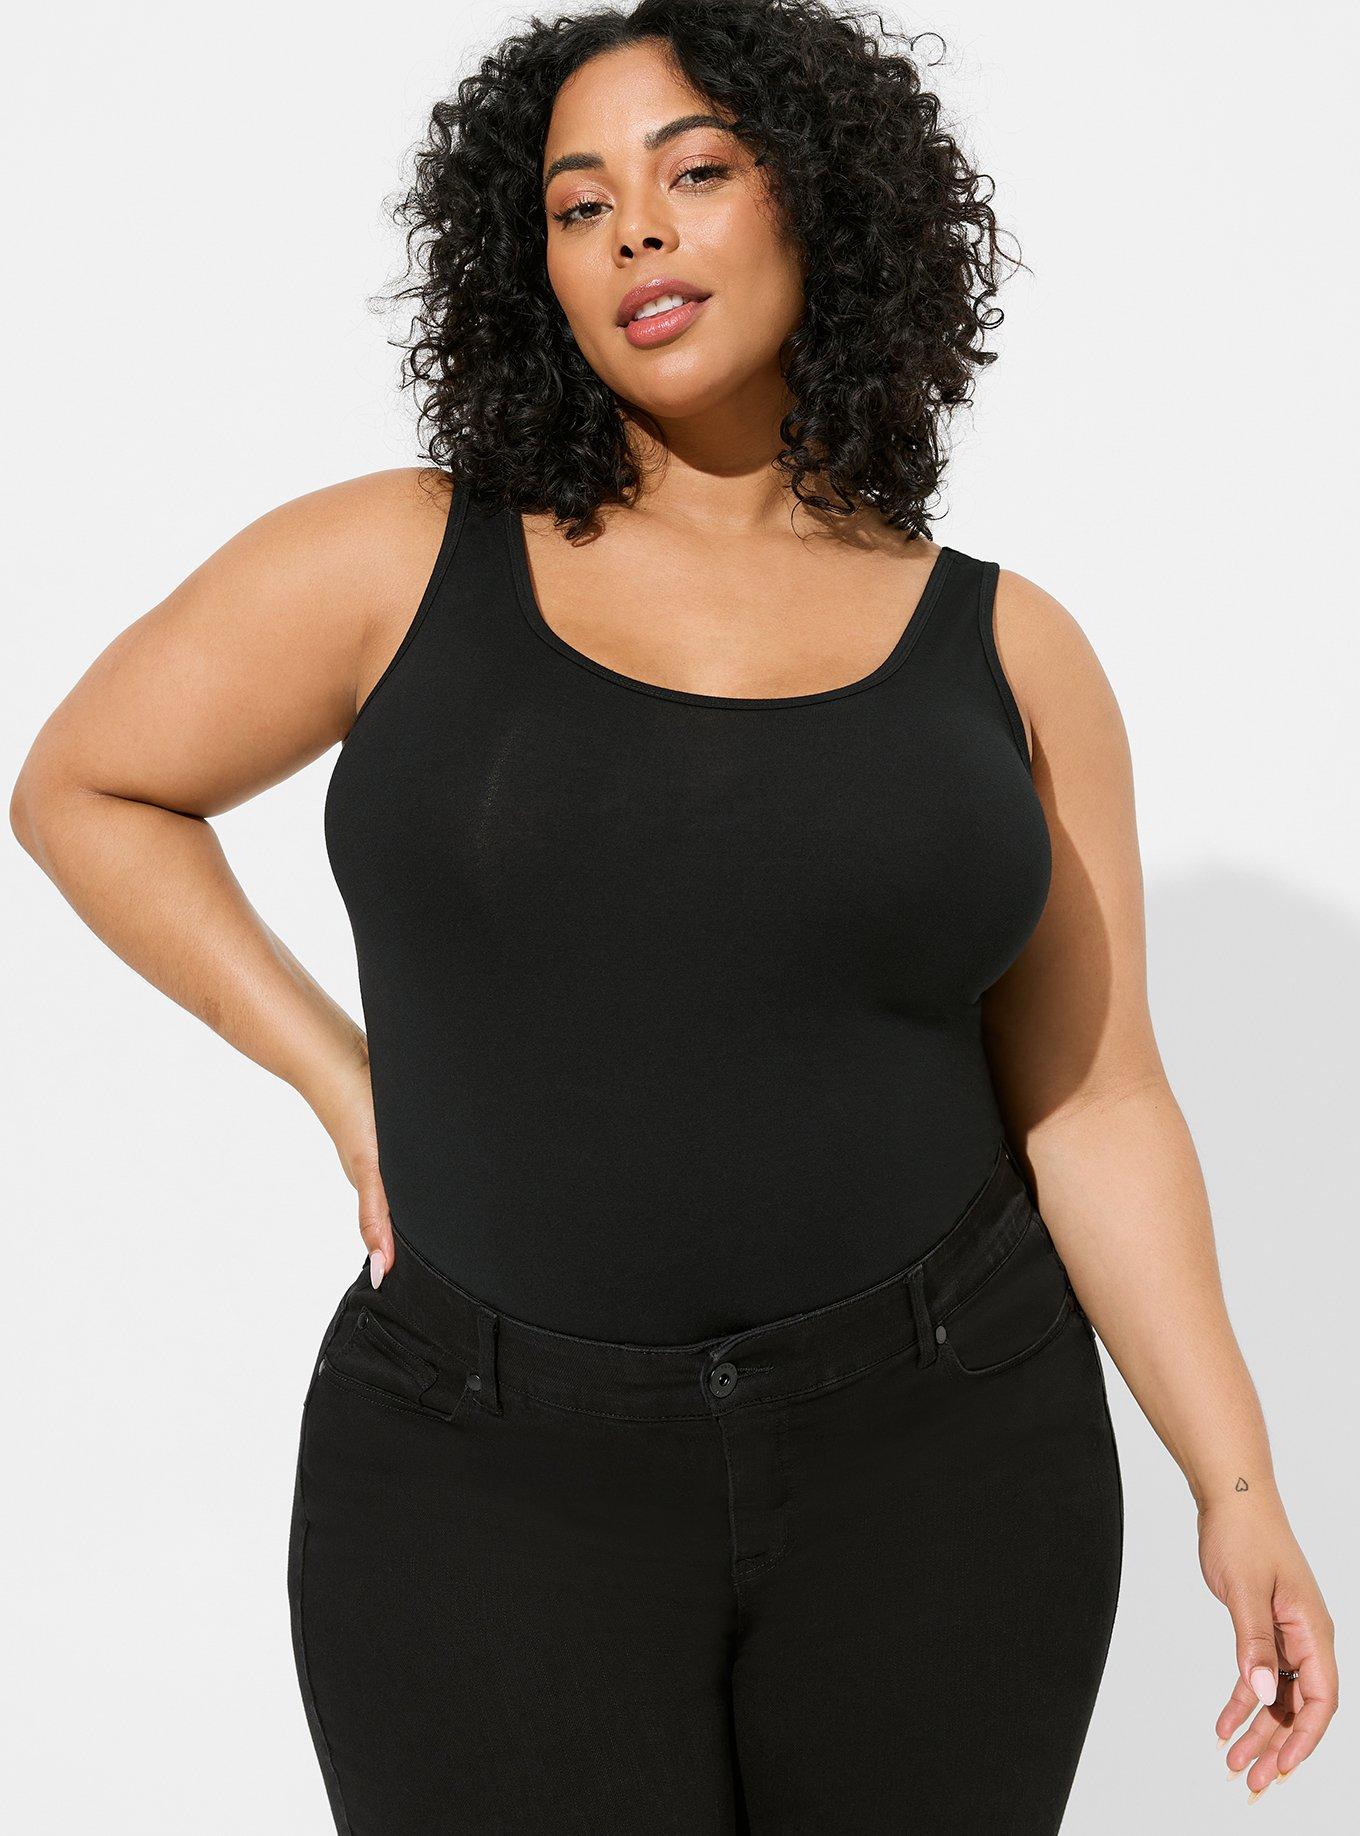 Torrid Black Ruched Foxy Tube Top, It's Time to Give Your Bodysuit a  Break, Because Tube Tops Are Huge For 2020